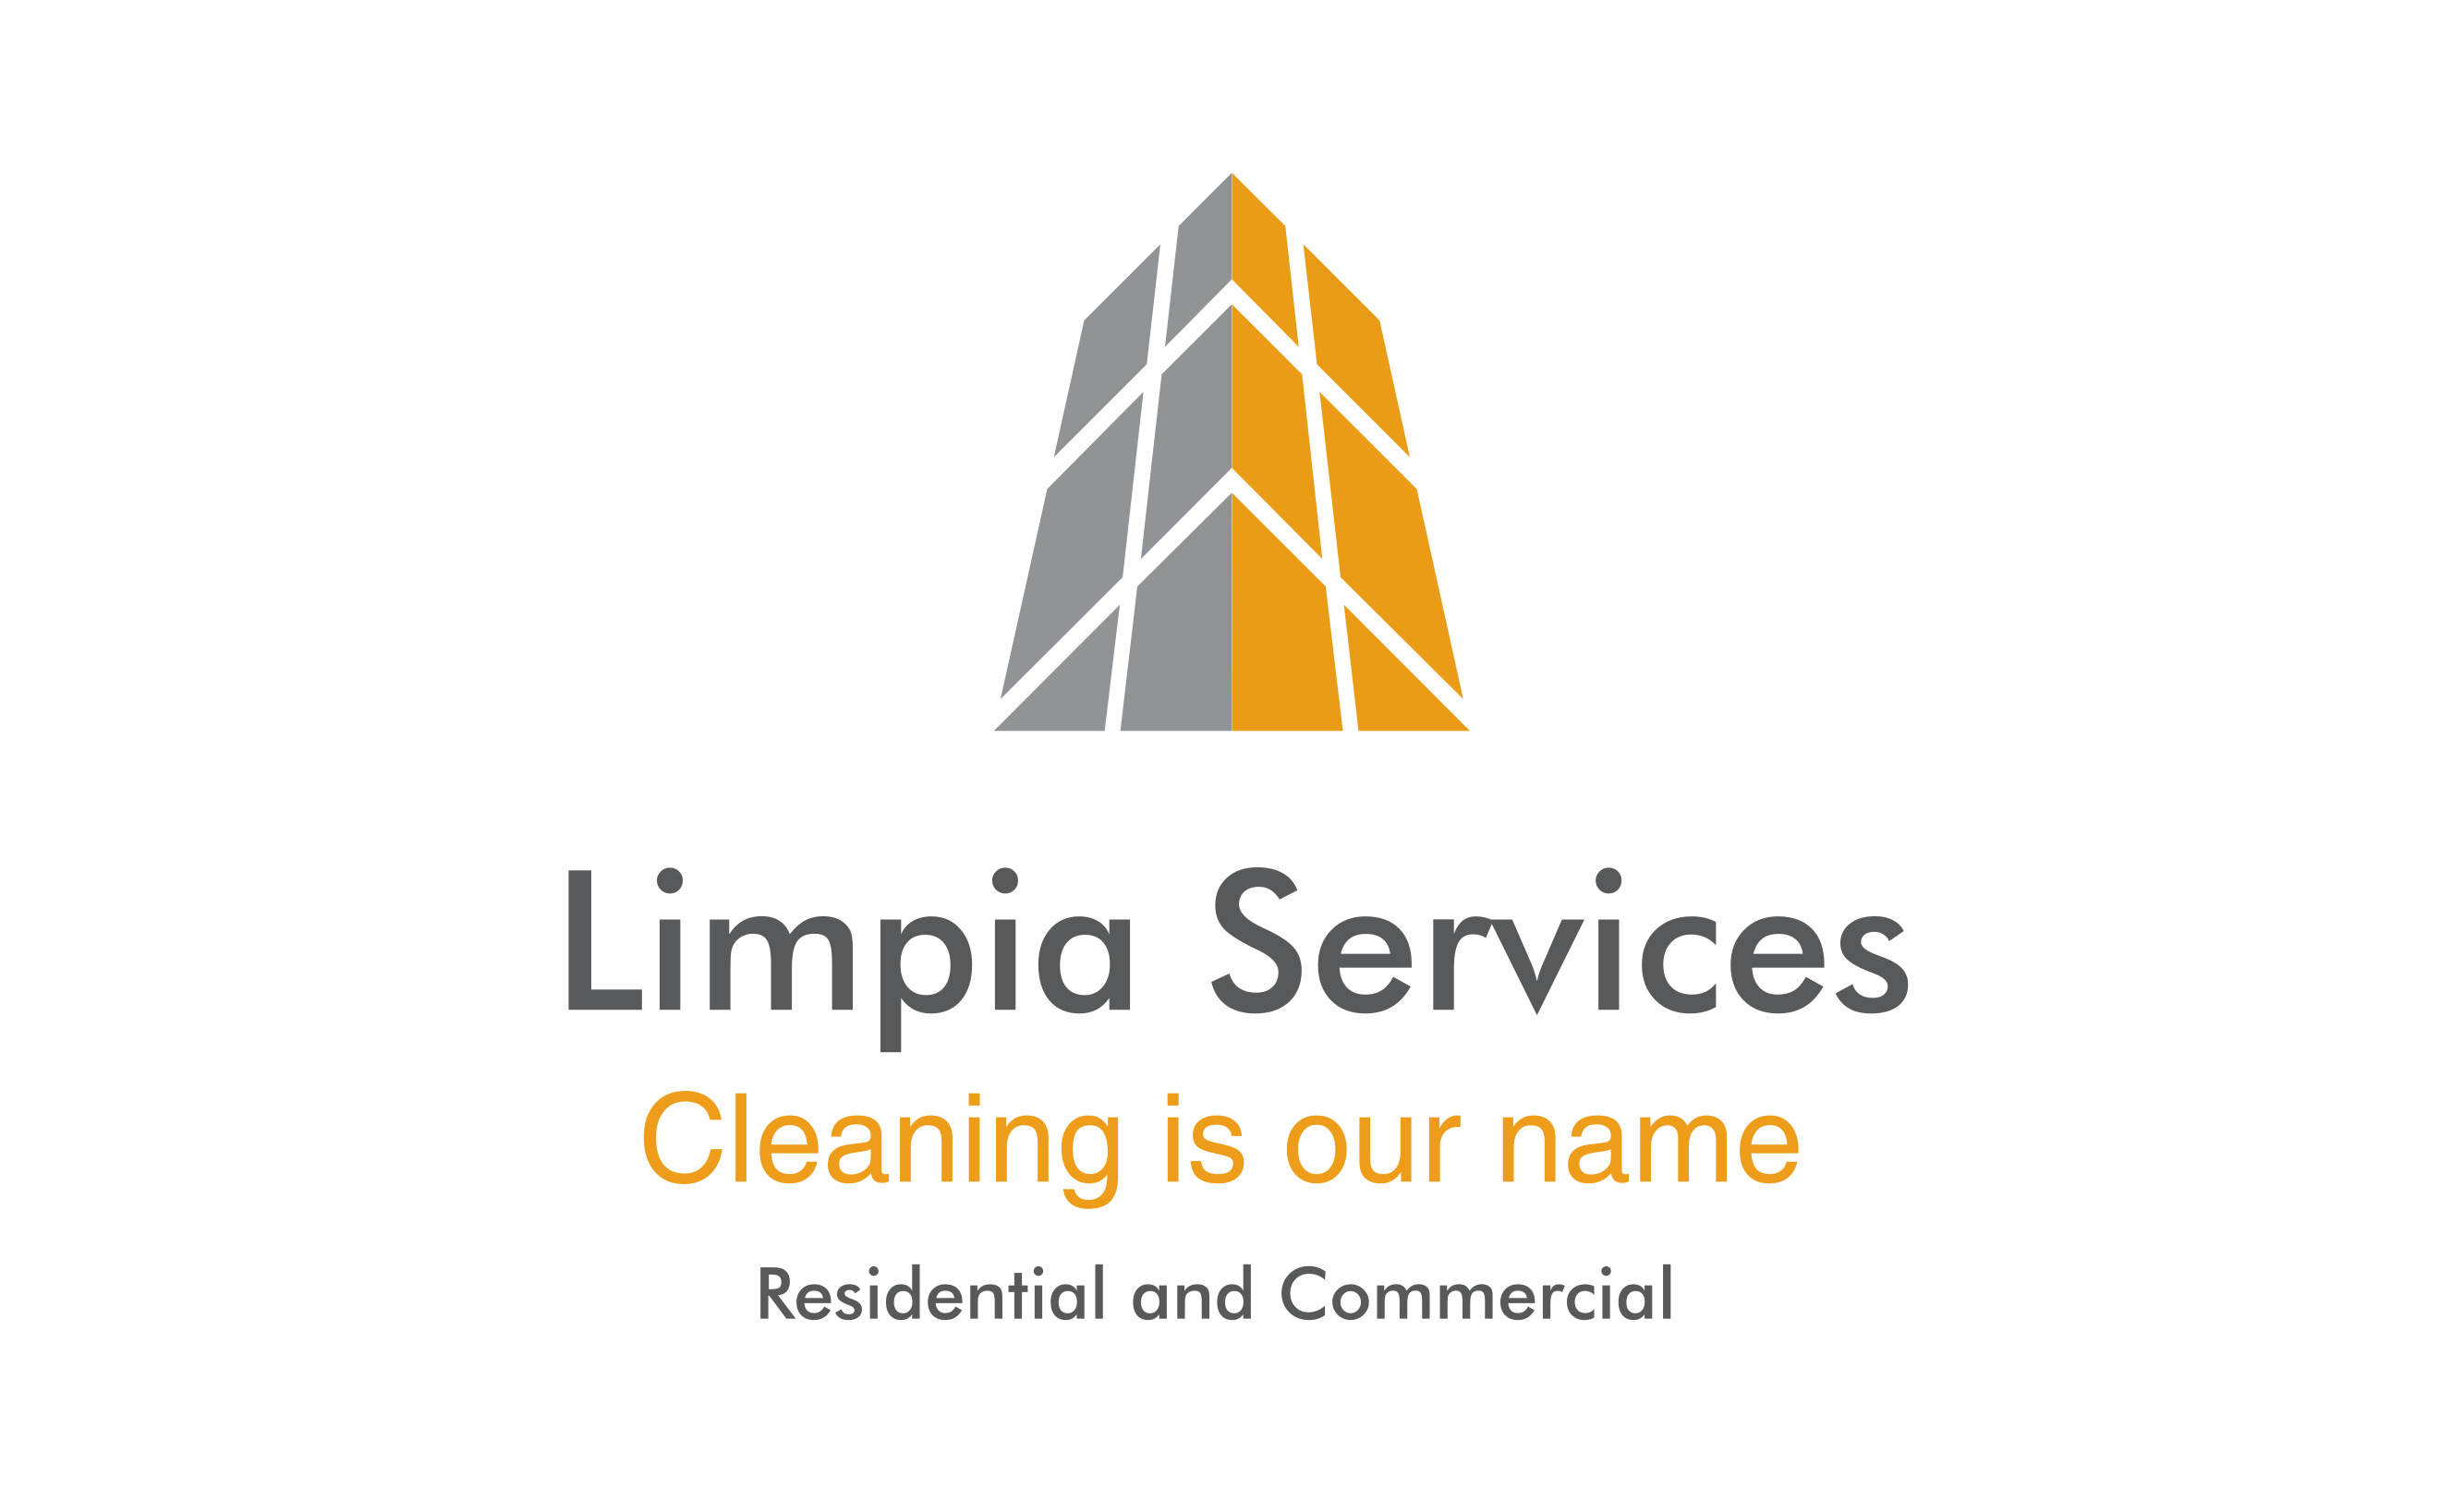 Limpia Cleaning Services Logo